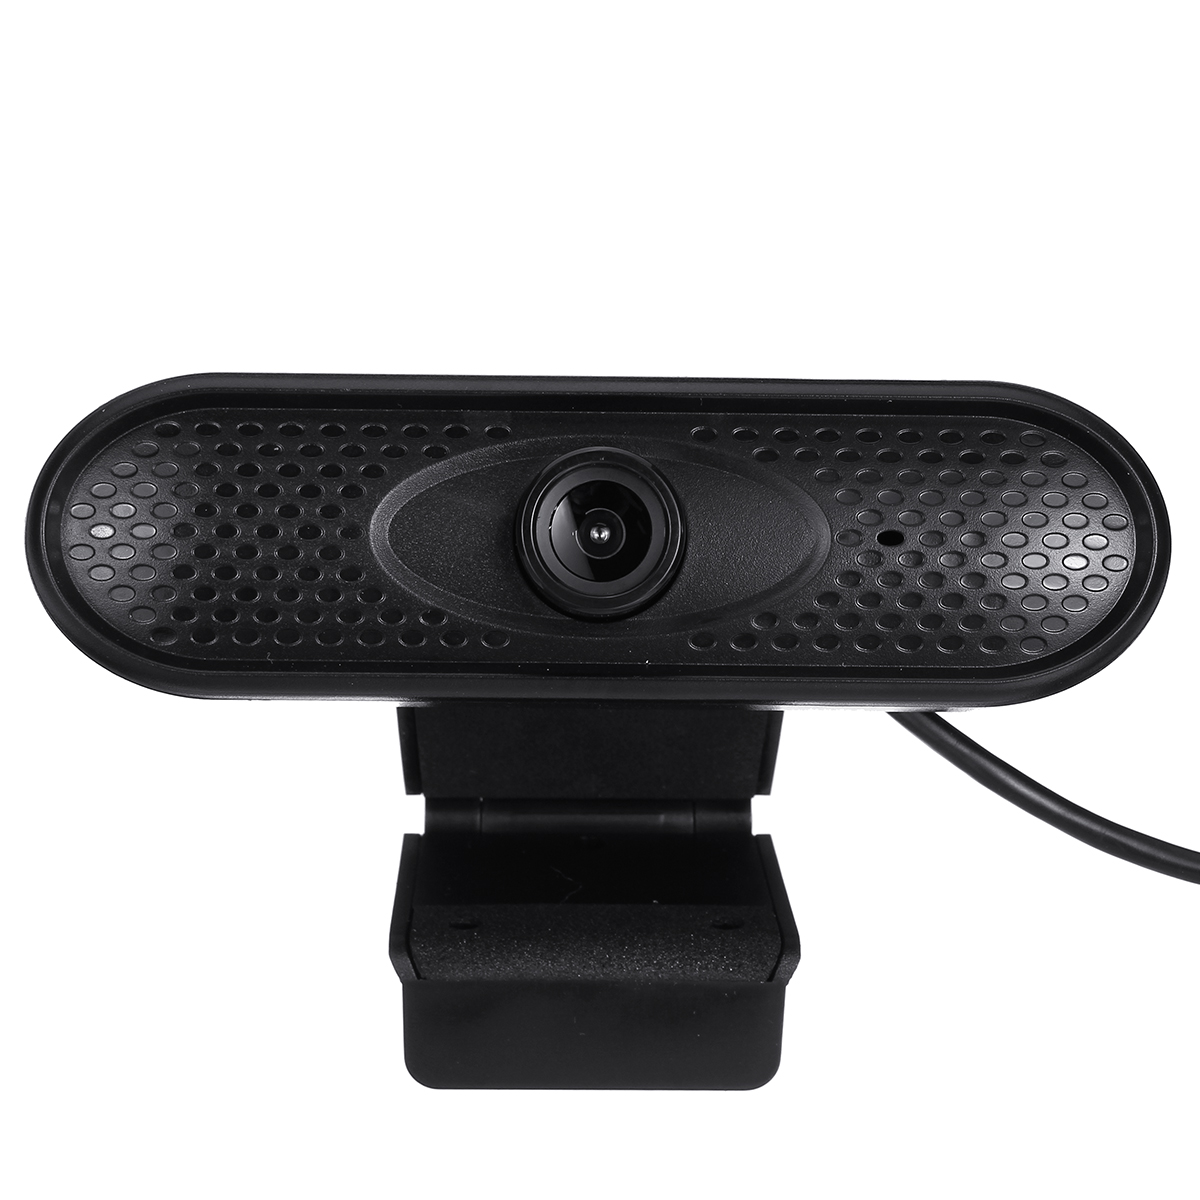 1080P HD USB Webcam Conference Live Manual Focus Computer Camera Built-in Omni-directional Micphone for PC Laptop